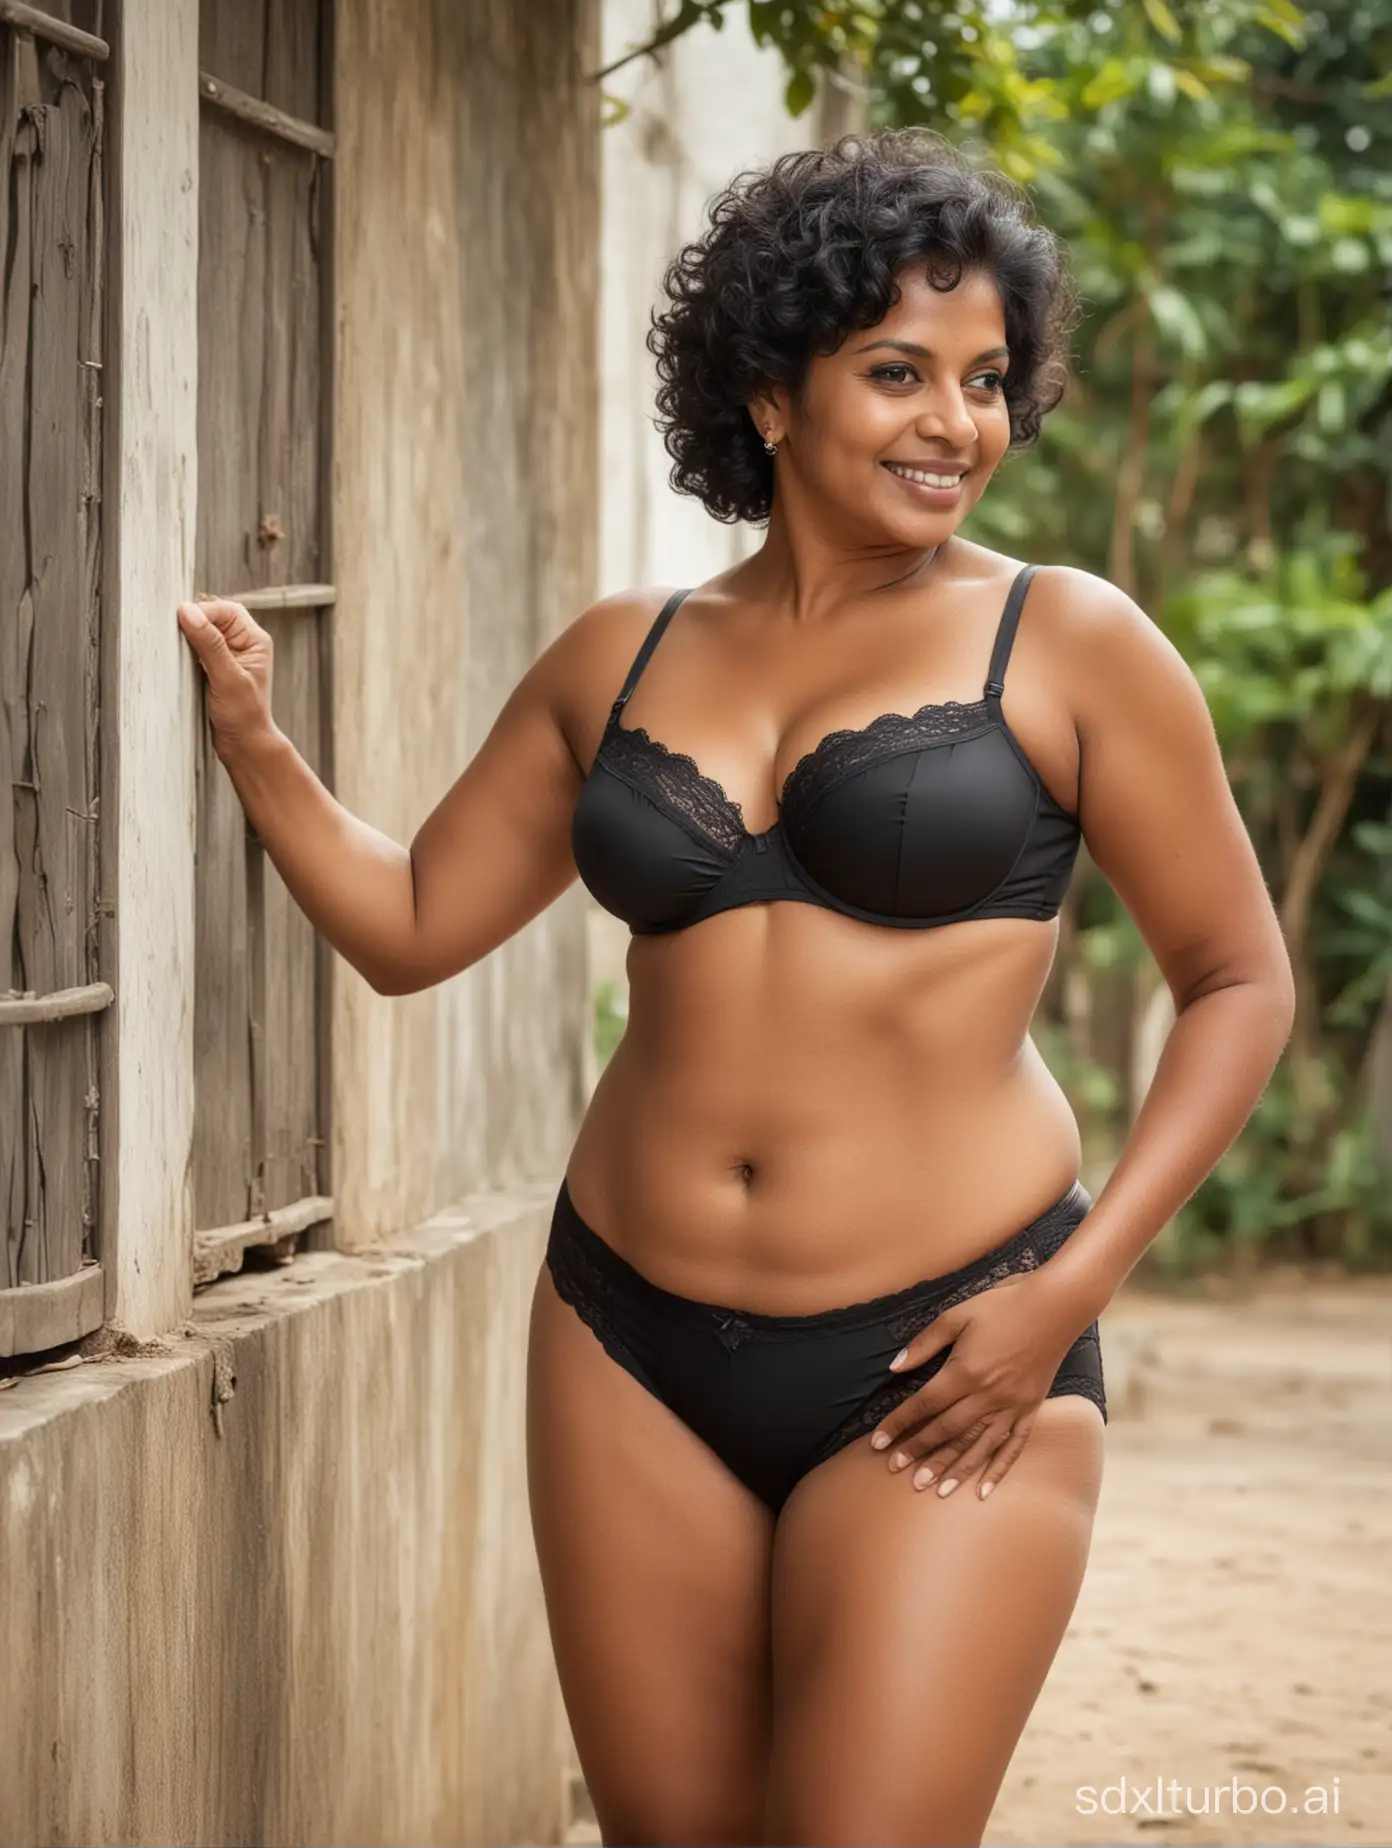 side view full body photo of a beautiful Sri Lankan woman, 60 years old, in a bra and panty, fat thighs, short legs, happy, curly black hair, outdoor photo-shoot, high detailed, Instagram style